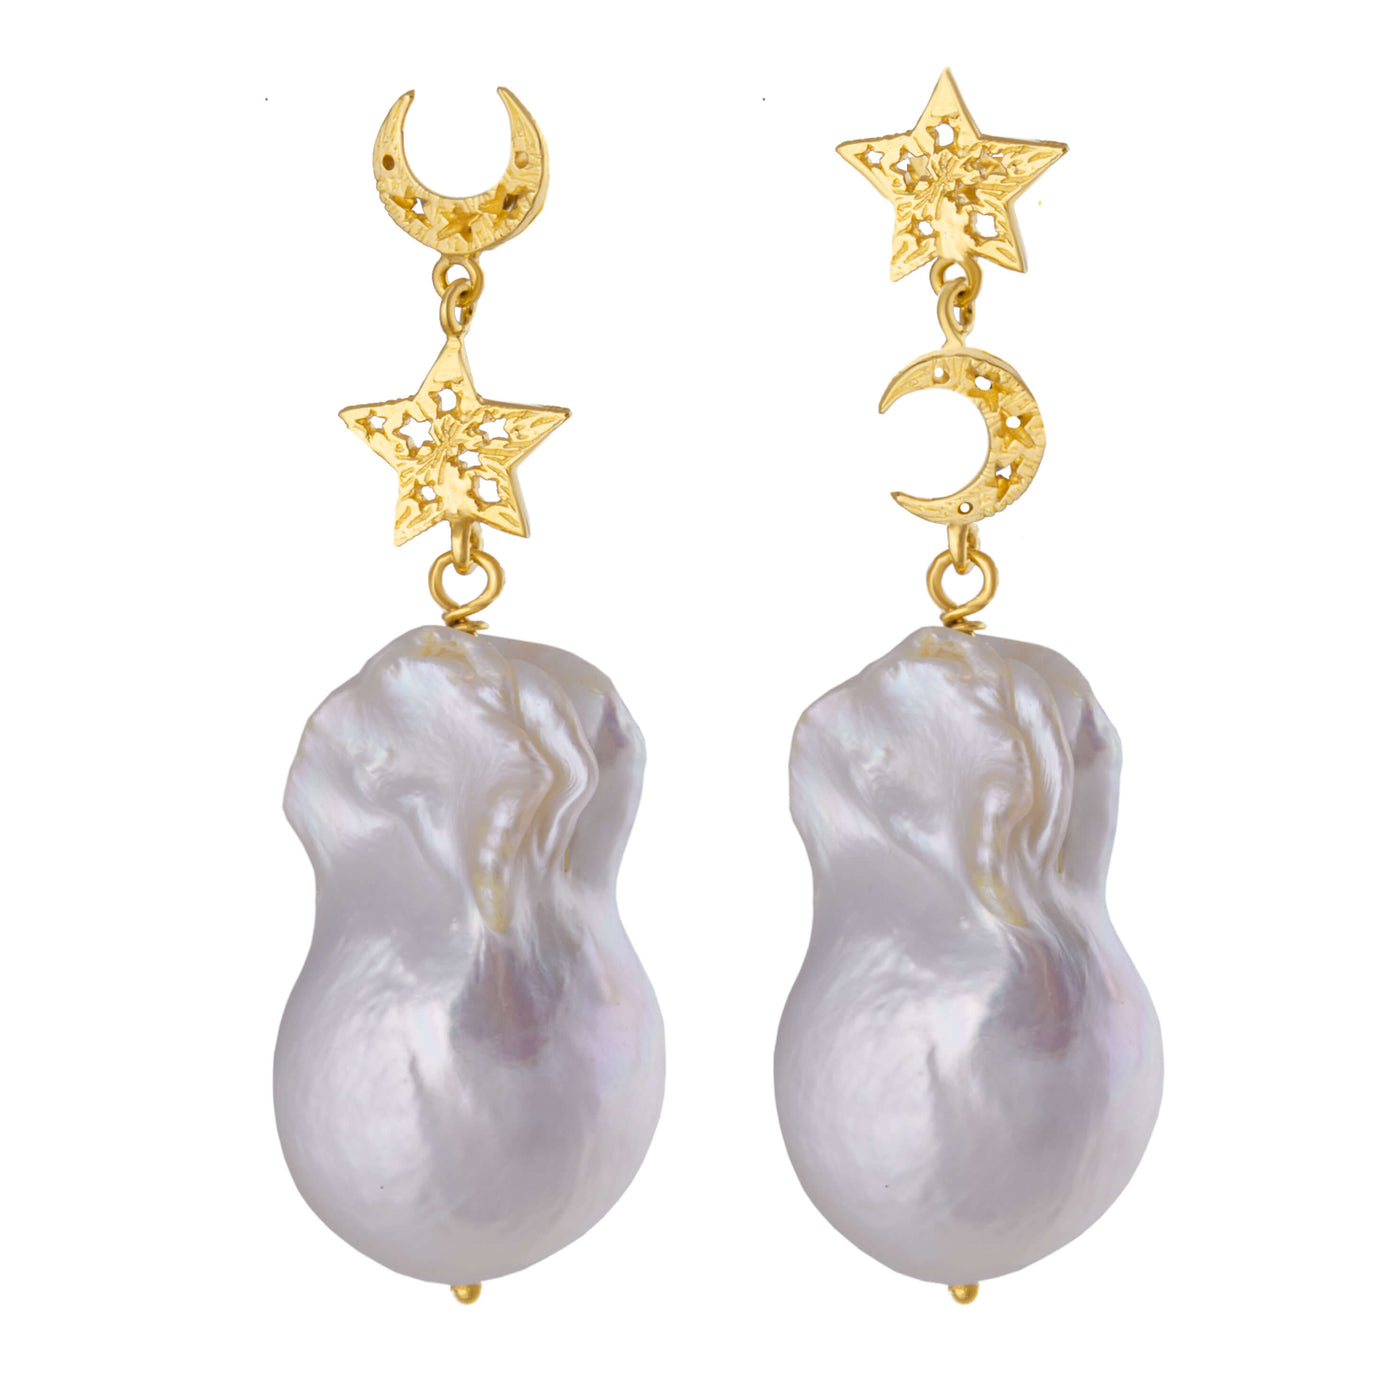 Moon and Star with baroque pearl earrings. Silver, gold-plated